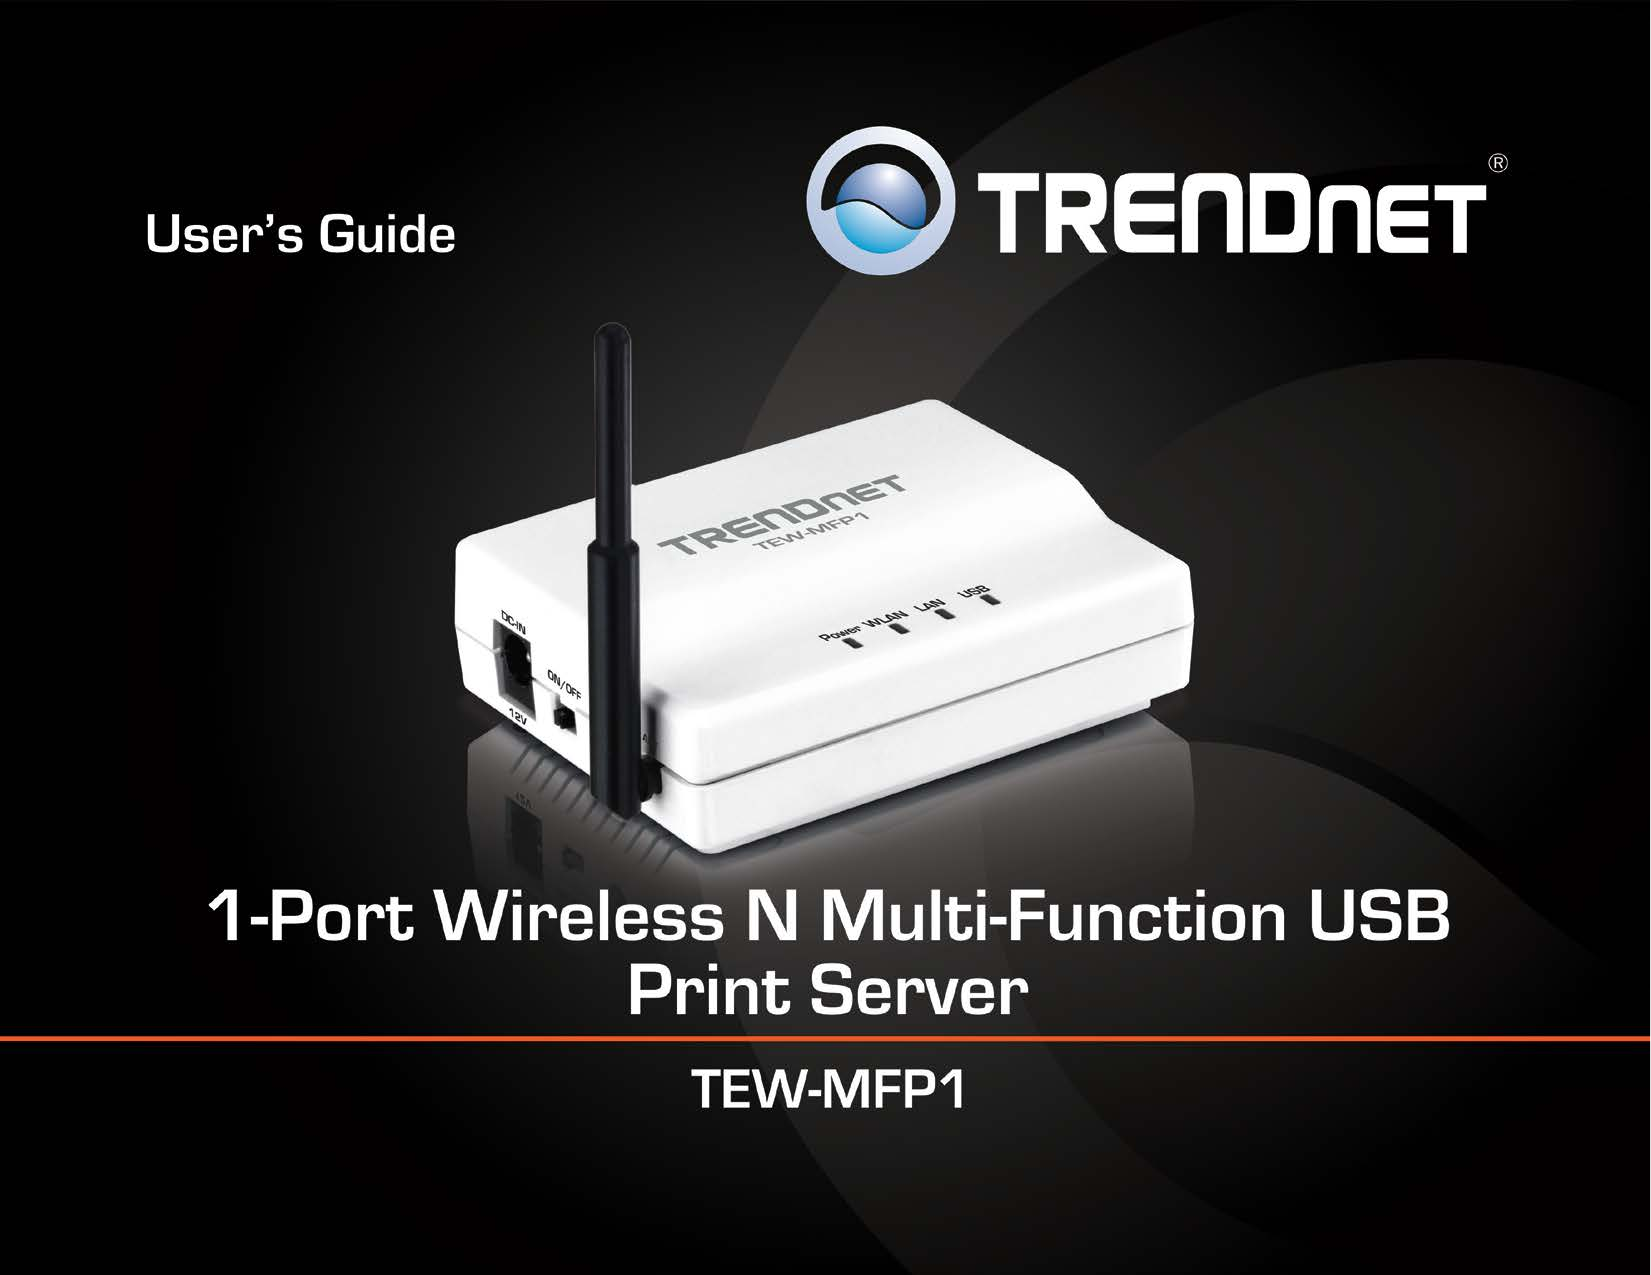              TRENDnet User’s Guide Cover Page 